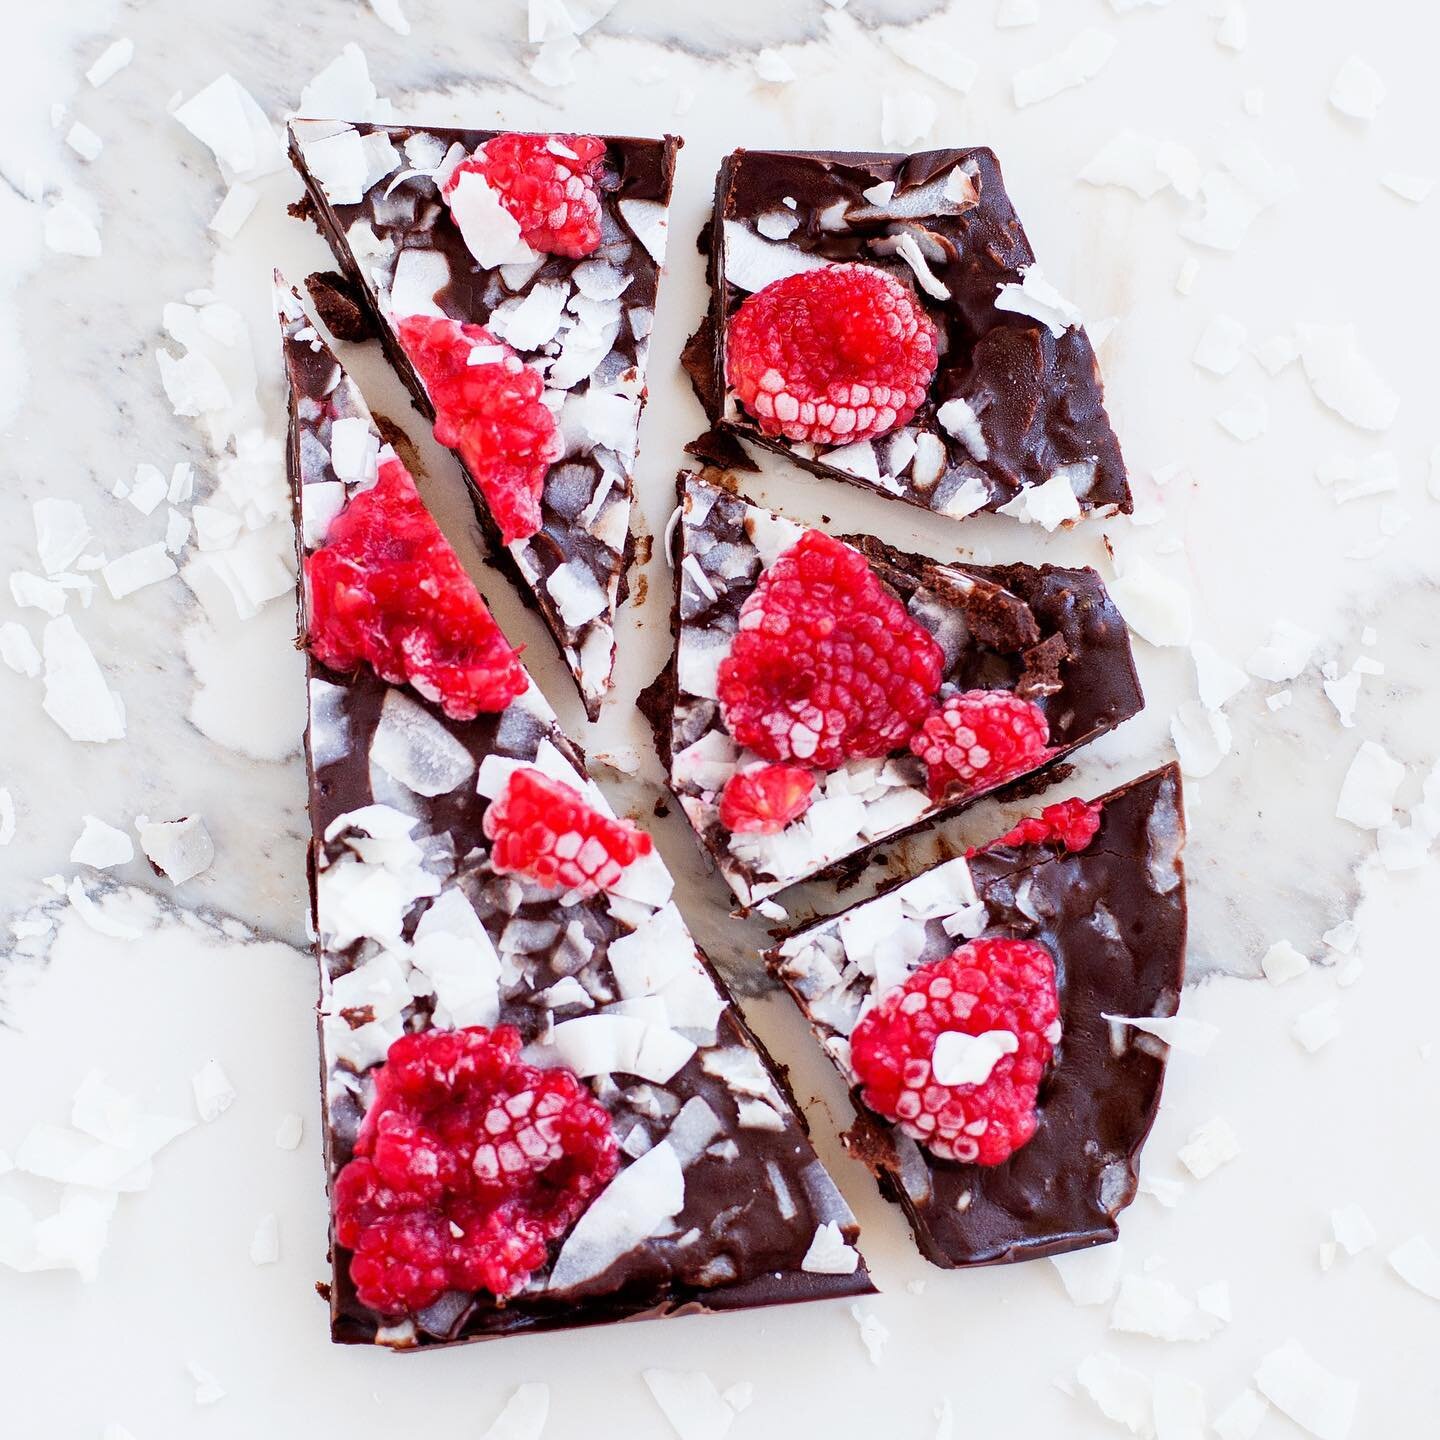 *** NEW RECIPE ***⠀
LOW SUGAR RAW CHOCOLATE RASPBERRY BAR⠀
Friends stop what you're doing and go make this recipe ASAP, trust me!!! It's the perfect clean eating + healthy treat you can feel good about. With just a few simple ingredients and about 5 